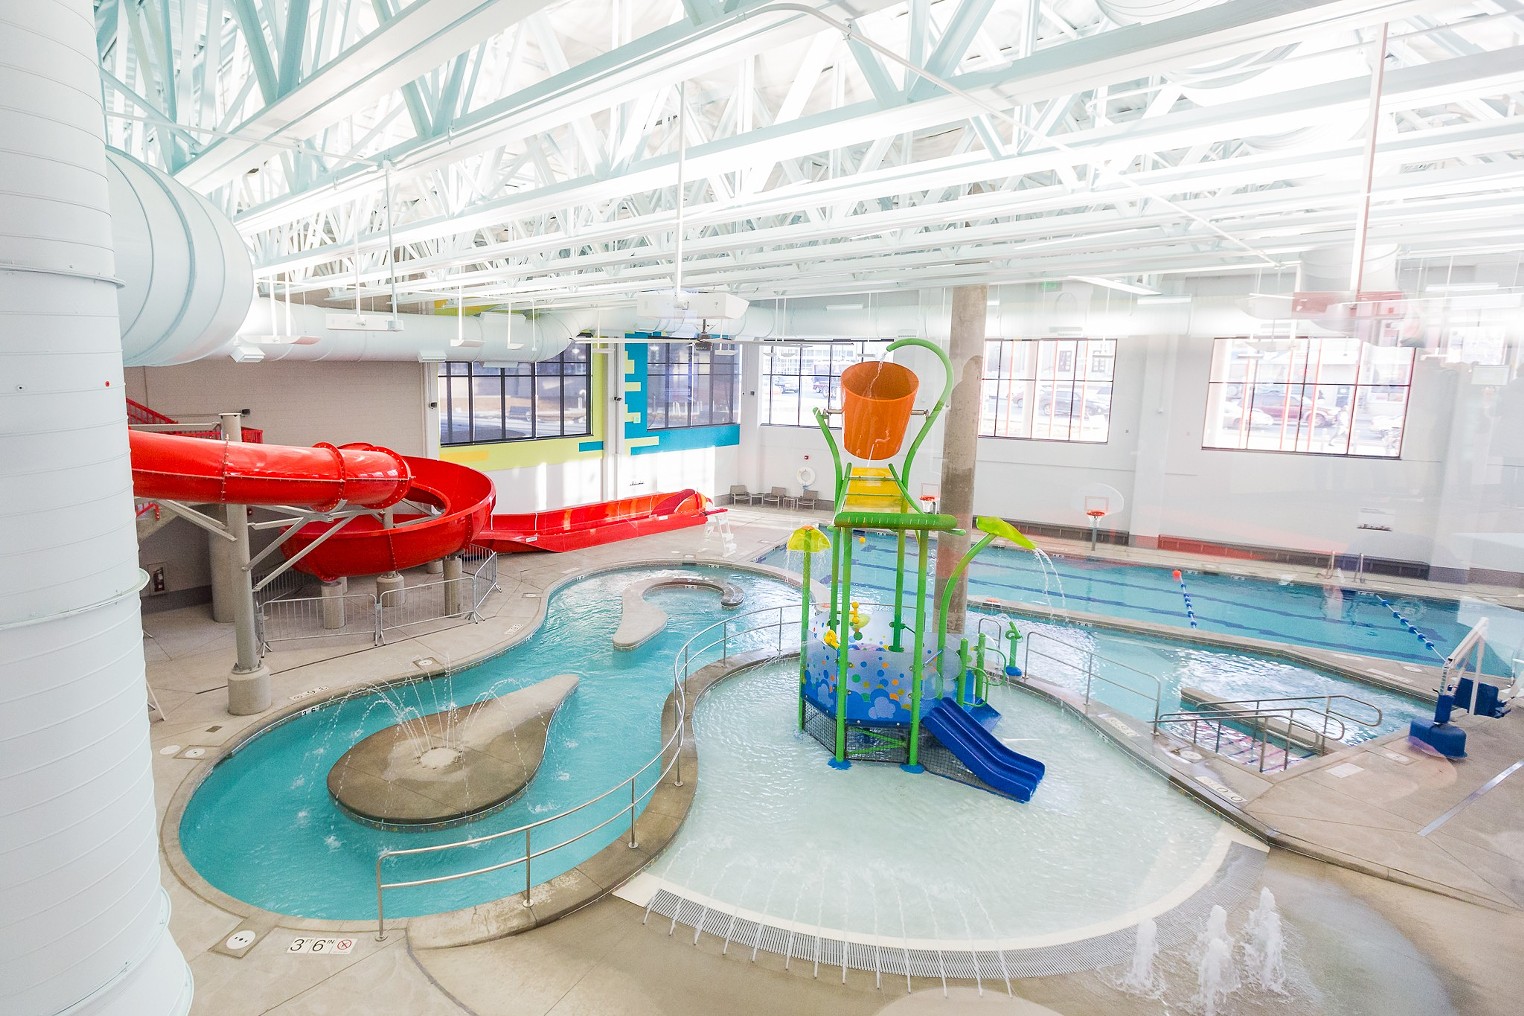 Best Public Swimming Pool 2019 Carla Madison Recreation Center Best of Denver® Best Restaurants, Bars, Clubs, Music and Stores in Denver Westword pic